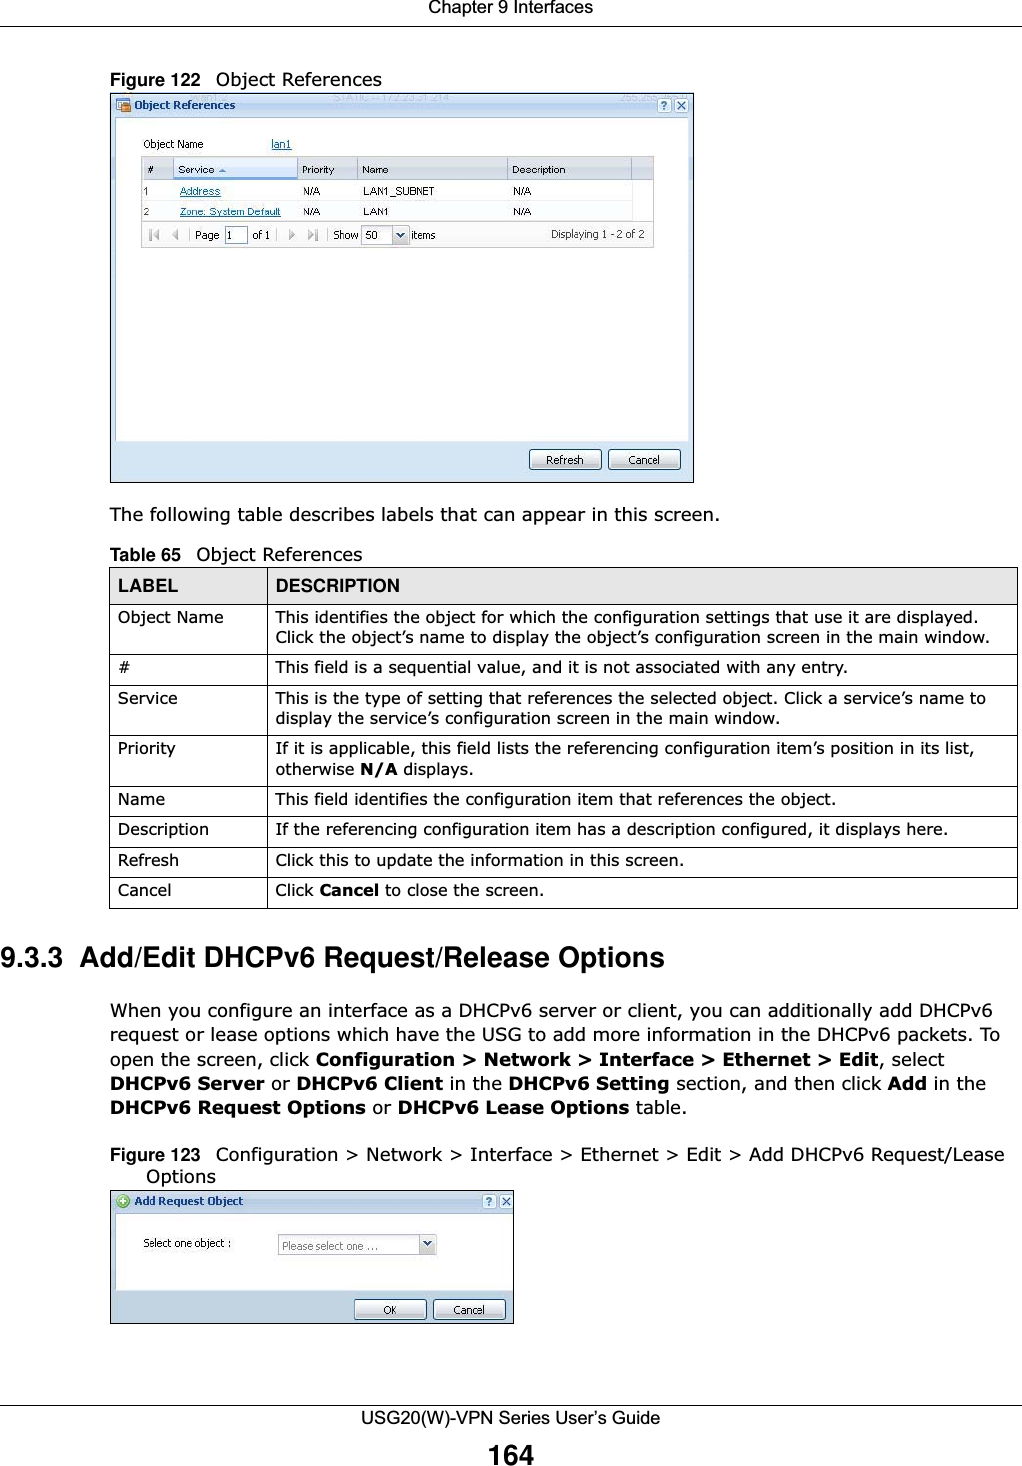 Chapter 9 InterfacesUSG20(W)-VPN Series User’s Guide164Figure 122   Object ReferencesThe following table describes labels that can appear in this screen.9.3.3  Add/Edit DHCPv6 Request/Release OptionsWhen you configure an interface as a DHCPv6 server or client, you can additionally add DHCPv6 request or lease options which have the USG to add more information in the DHCPv6 packets. To open the screen, click Configuration &gt; Network &gt; Interface &gt; Ethernet &gt; Edit, select DHCPv6 Server or DHCPv6 Client in the DHCPv6 Setting section, and then click Add in the DHCPv6 Request Options or DHCPv6 Lease Options table.Figure 123   Configuration &gt; Network &gt; Interface &gt; Ethernet &gt; Edit &gt; Add DHCPv6 Request/Lease Options   Table 65   Object ReferencesLABEL DESCRIPTIONObject Name This identifies the object for which the configuration settings that use it are displayed. Click the object’s name to display the object’s configuration screen in the main window.# This field is a sequential value, and it is not associated with any entry.Service This is the type of setting that references the selected object. Click a service’s name to display the service’s configuration screen in the main window.Priority If it is applicable, this field lists the referencing configuration item’s position in its list, otherwise N/A displays.Name This field identifies the configuration item that references the object.Description If the referencing configuration item has a description configured, it displays here. Refresh Click this to update the information in this screen.Cancel Click Cancel to close the screen.